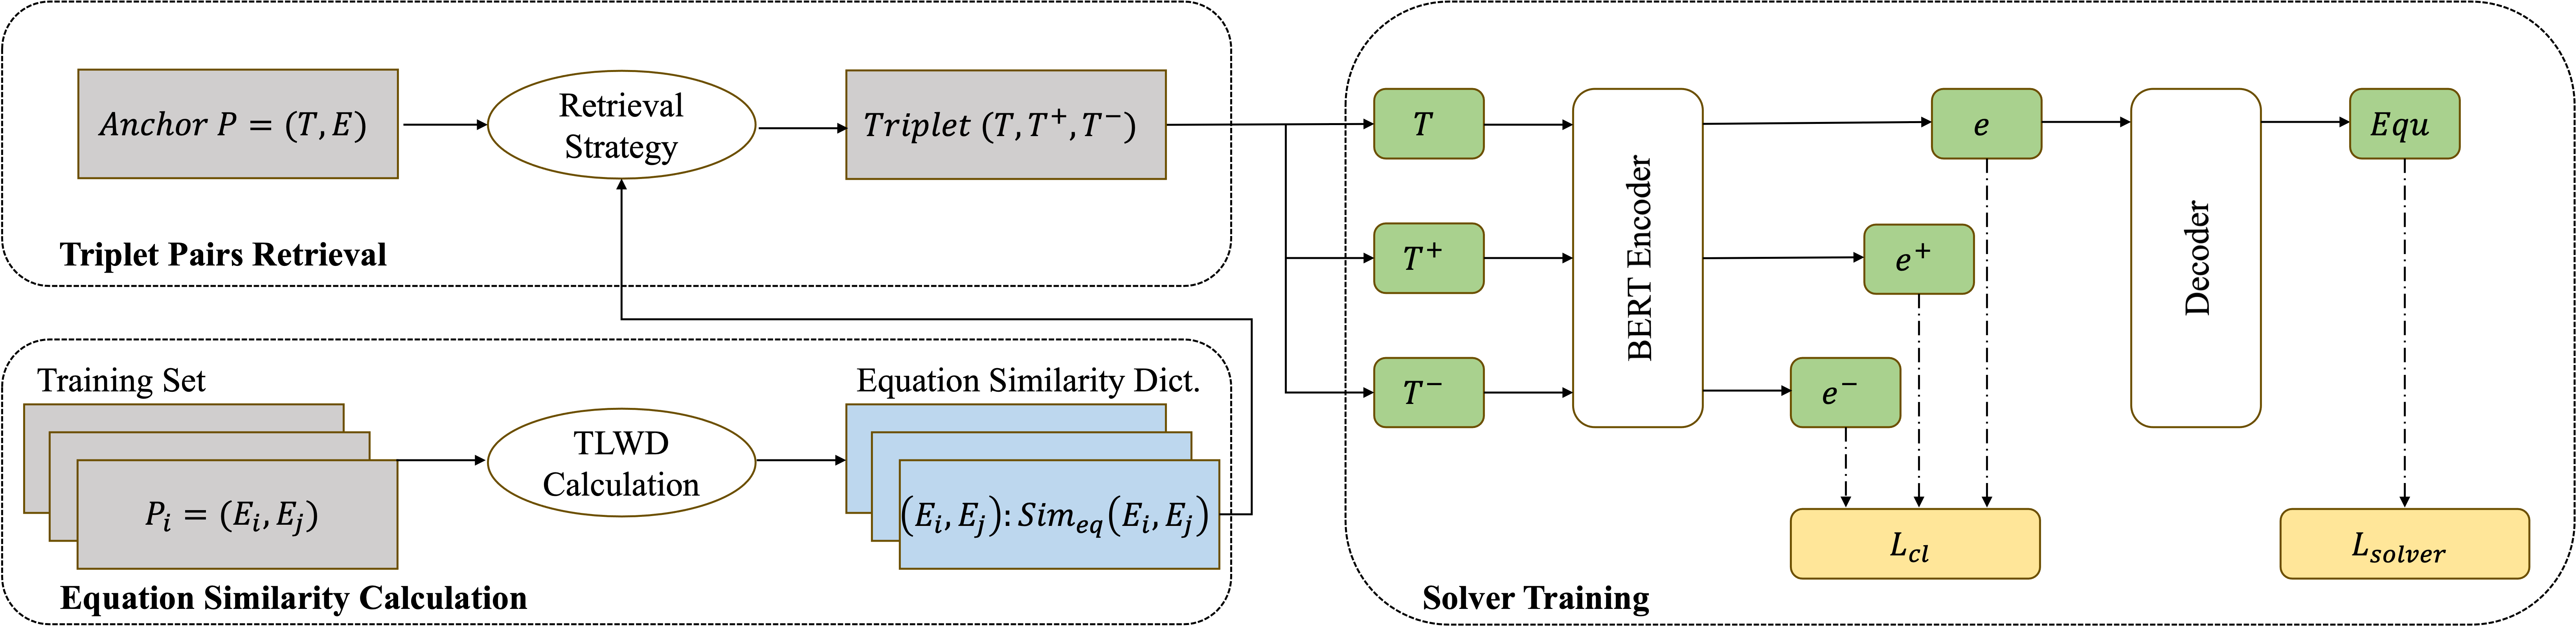 This figure illustrates the process of constructing data points for contrastive learning with a mathematical problem example. It shows an anchor problem \( P=(T,E) \), where \( T \) is the problem description and \( E \) is the solution equation. Alongside the anchor, a positive data point \( P^{+}=(T^{+},E^{+}) \) and a negative data point \( P^{-}=(T^{-},E^{-}) \) are displayed. The diagram emphasizes the contrastive learning goal, which is to bring the representations of the anchor \( P \) and the positive \( P^{+} \) closer together while distancing the representation of the anchor \( P \) from the negative \( P^{-} \).